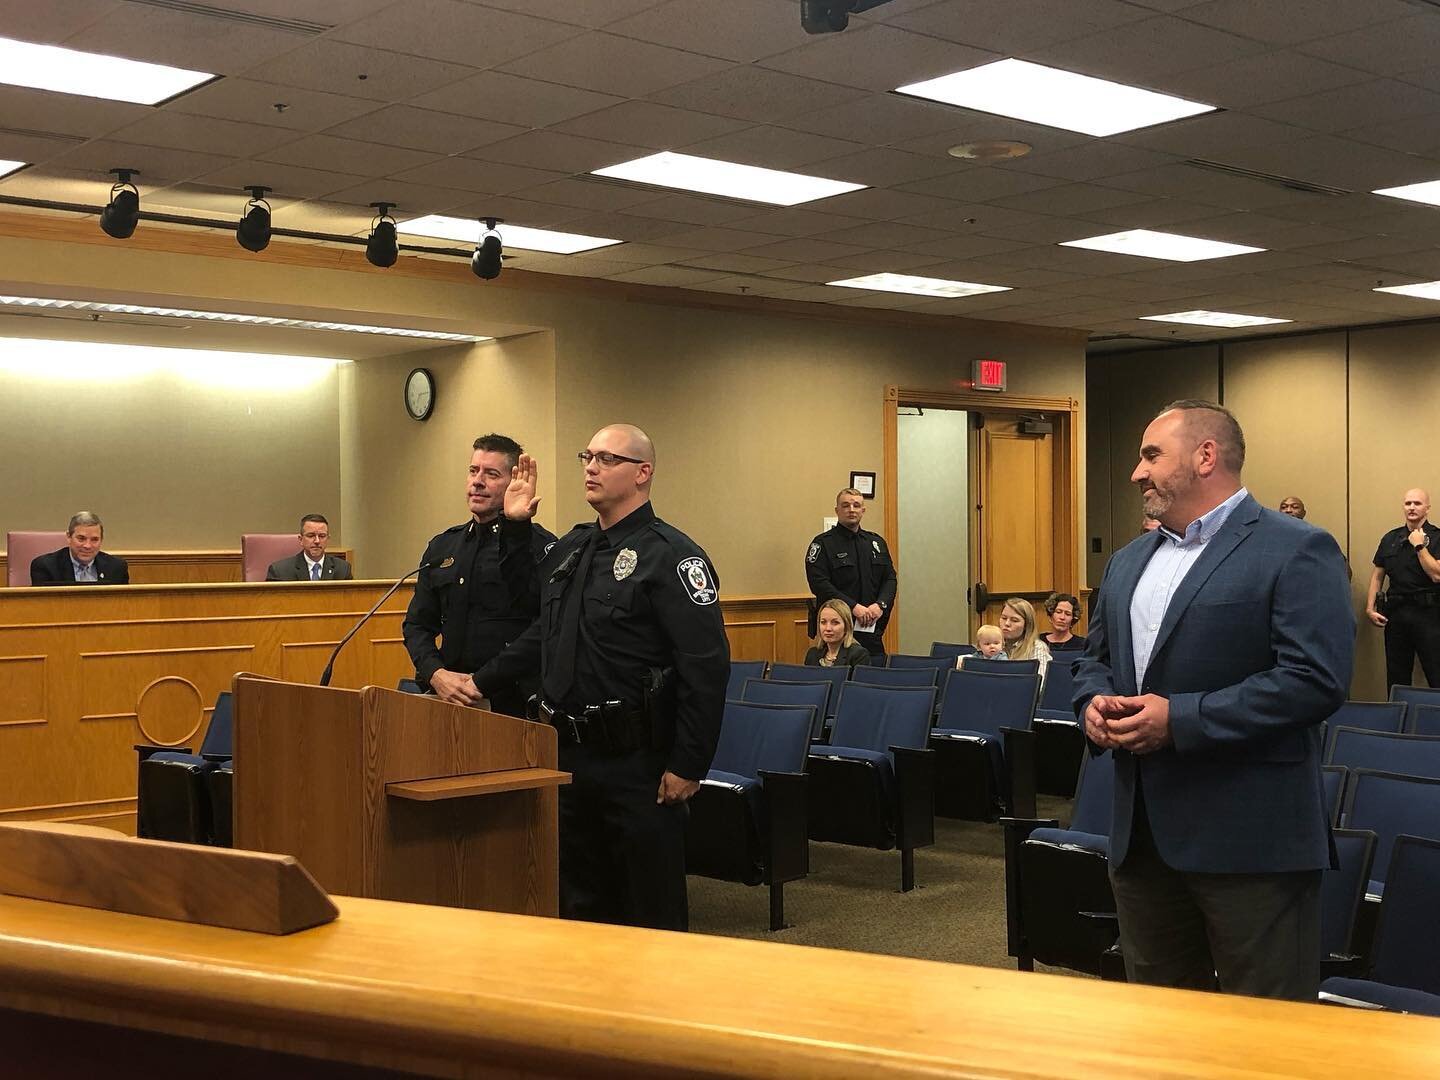 Tonight at the City Commission meeting we swore in two new officers to BPD. Please welcome Officer Derick Dragon and Officer Alvin Collins! We are so fortunate to have them in Brentwood!